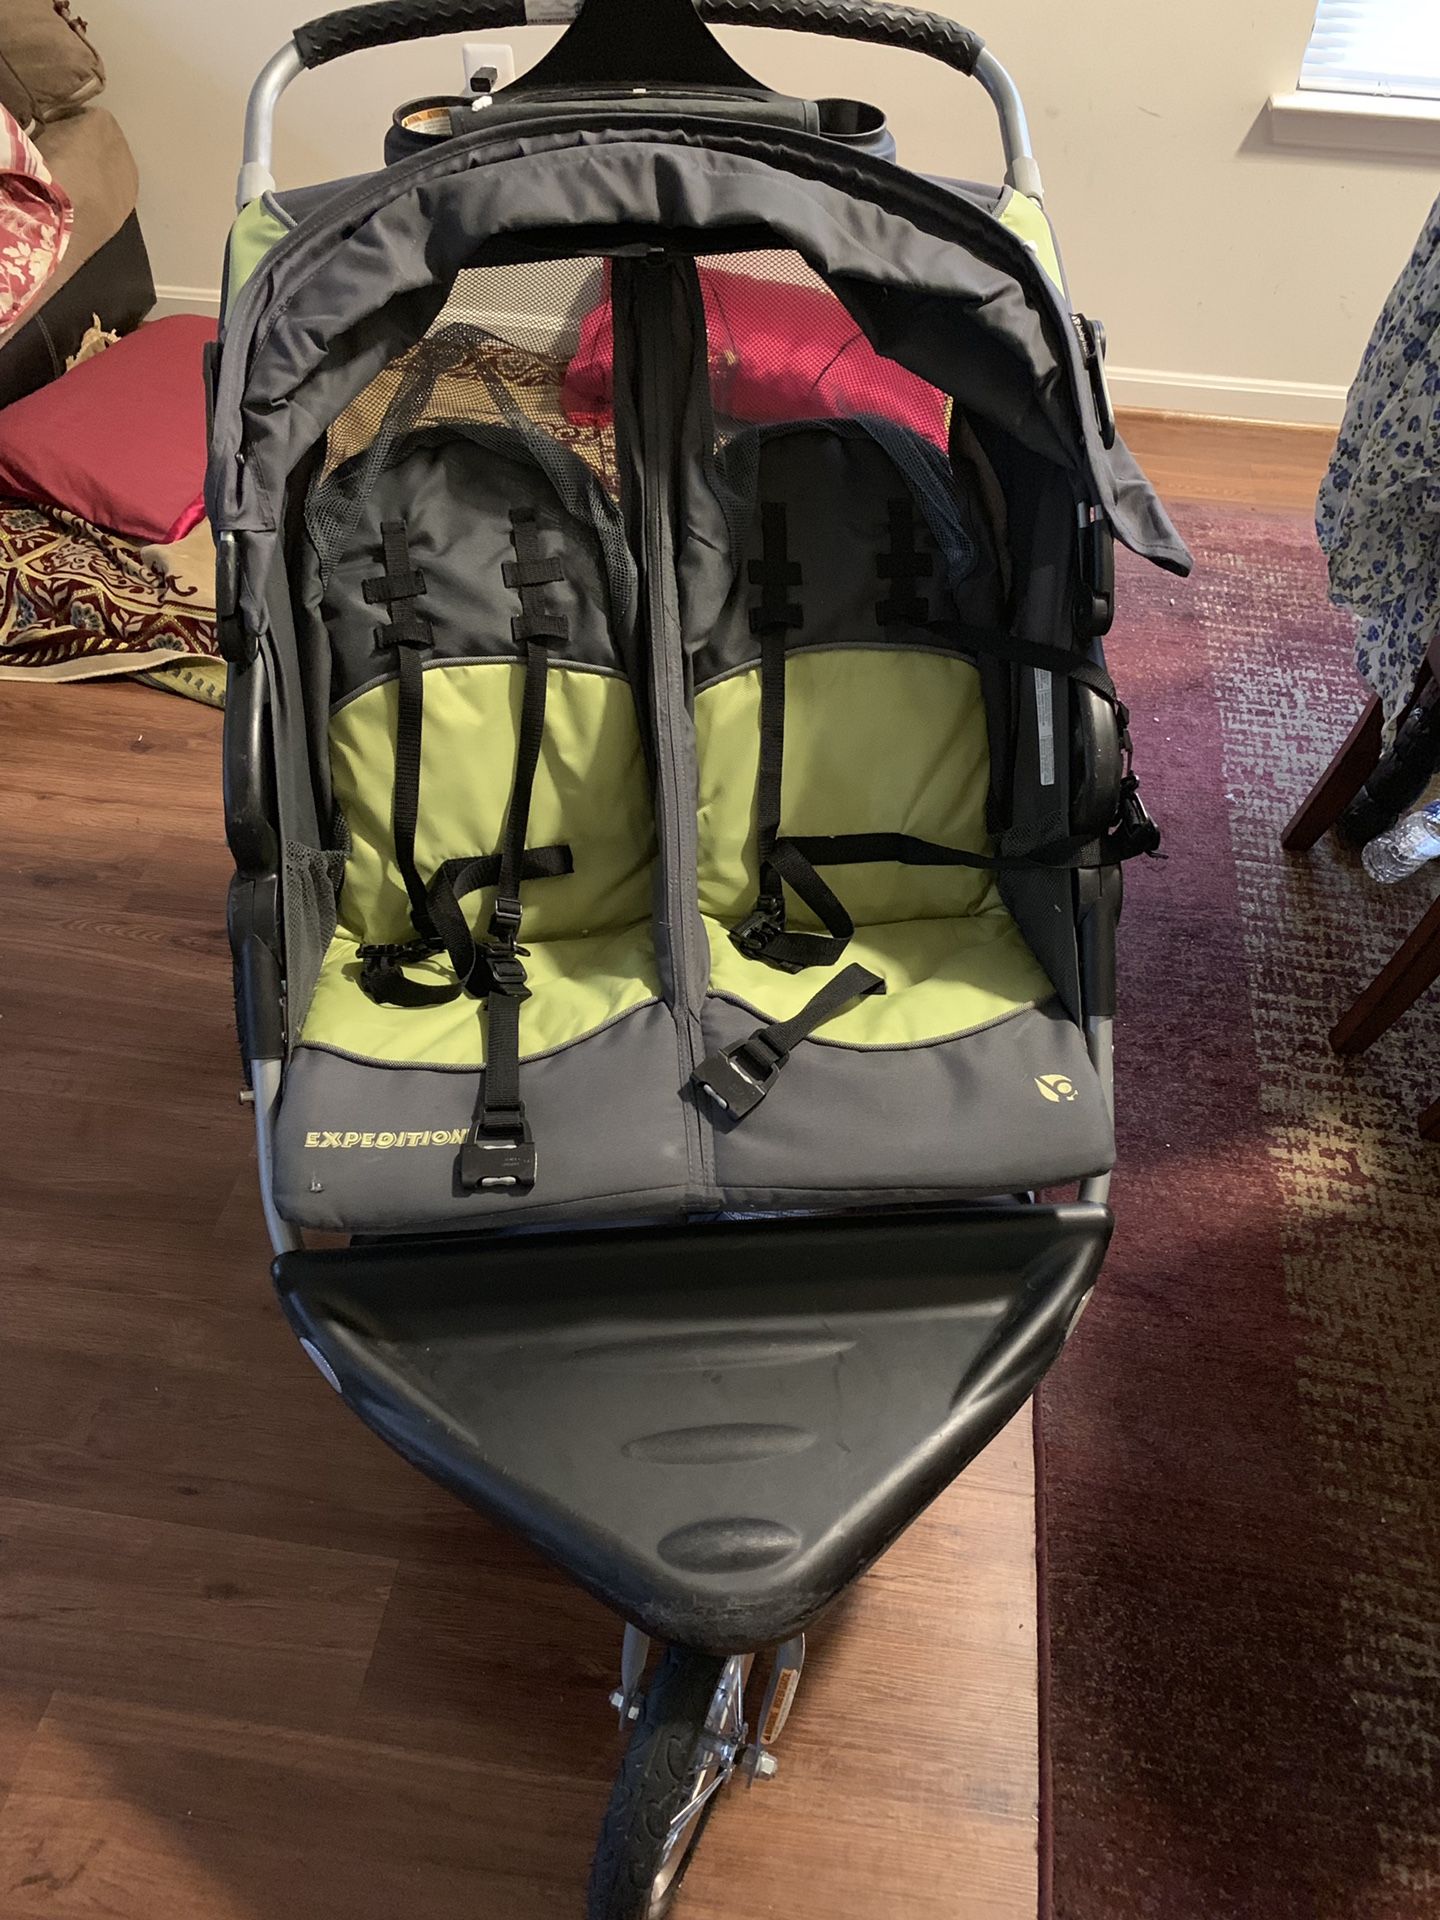 Baby trend stroller- only used for 8 months. In good condition. $200 when I bought it